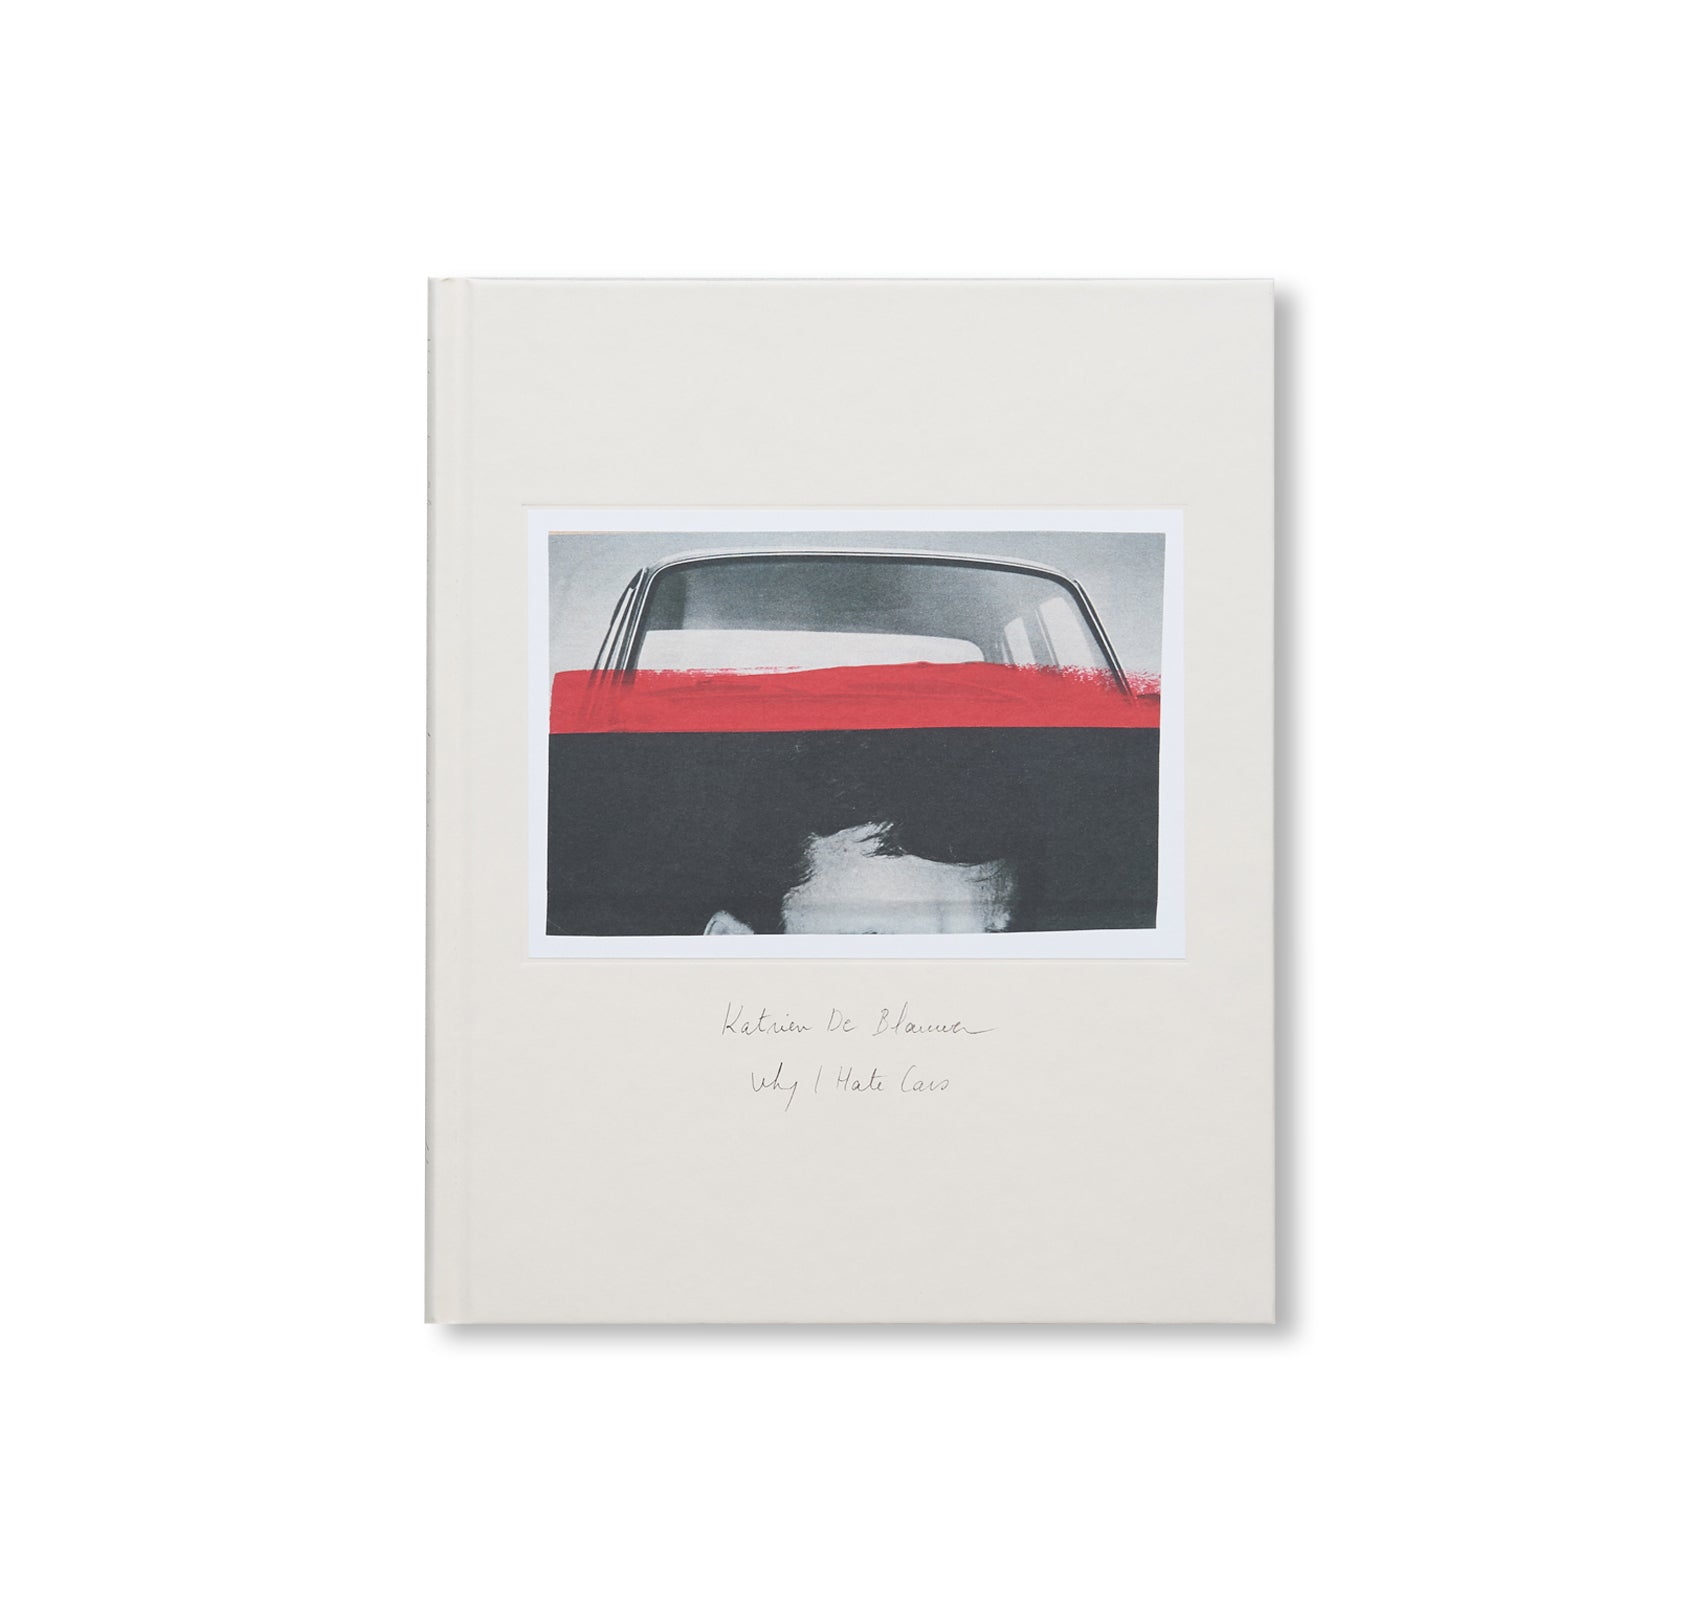 WHY I HATE CARS by Katrien De Blauwer [SPECIAL EDITION]